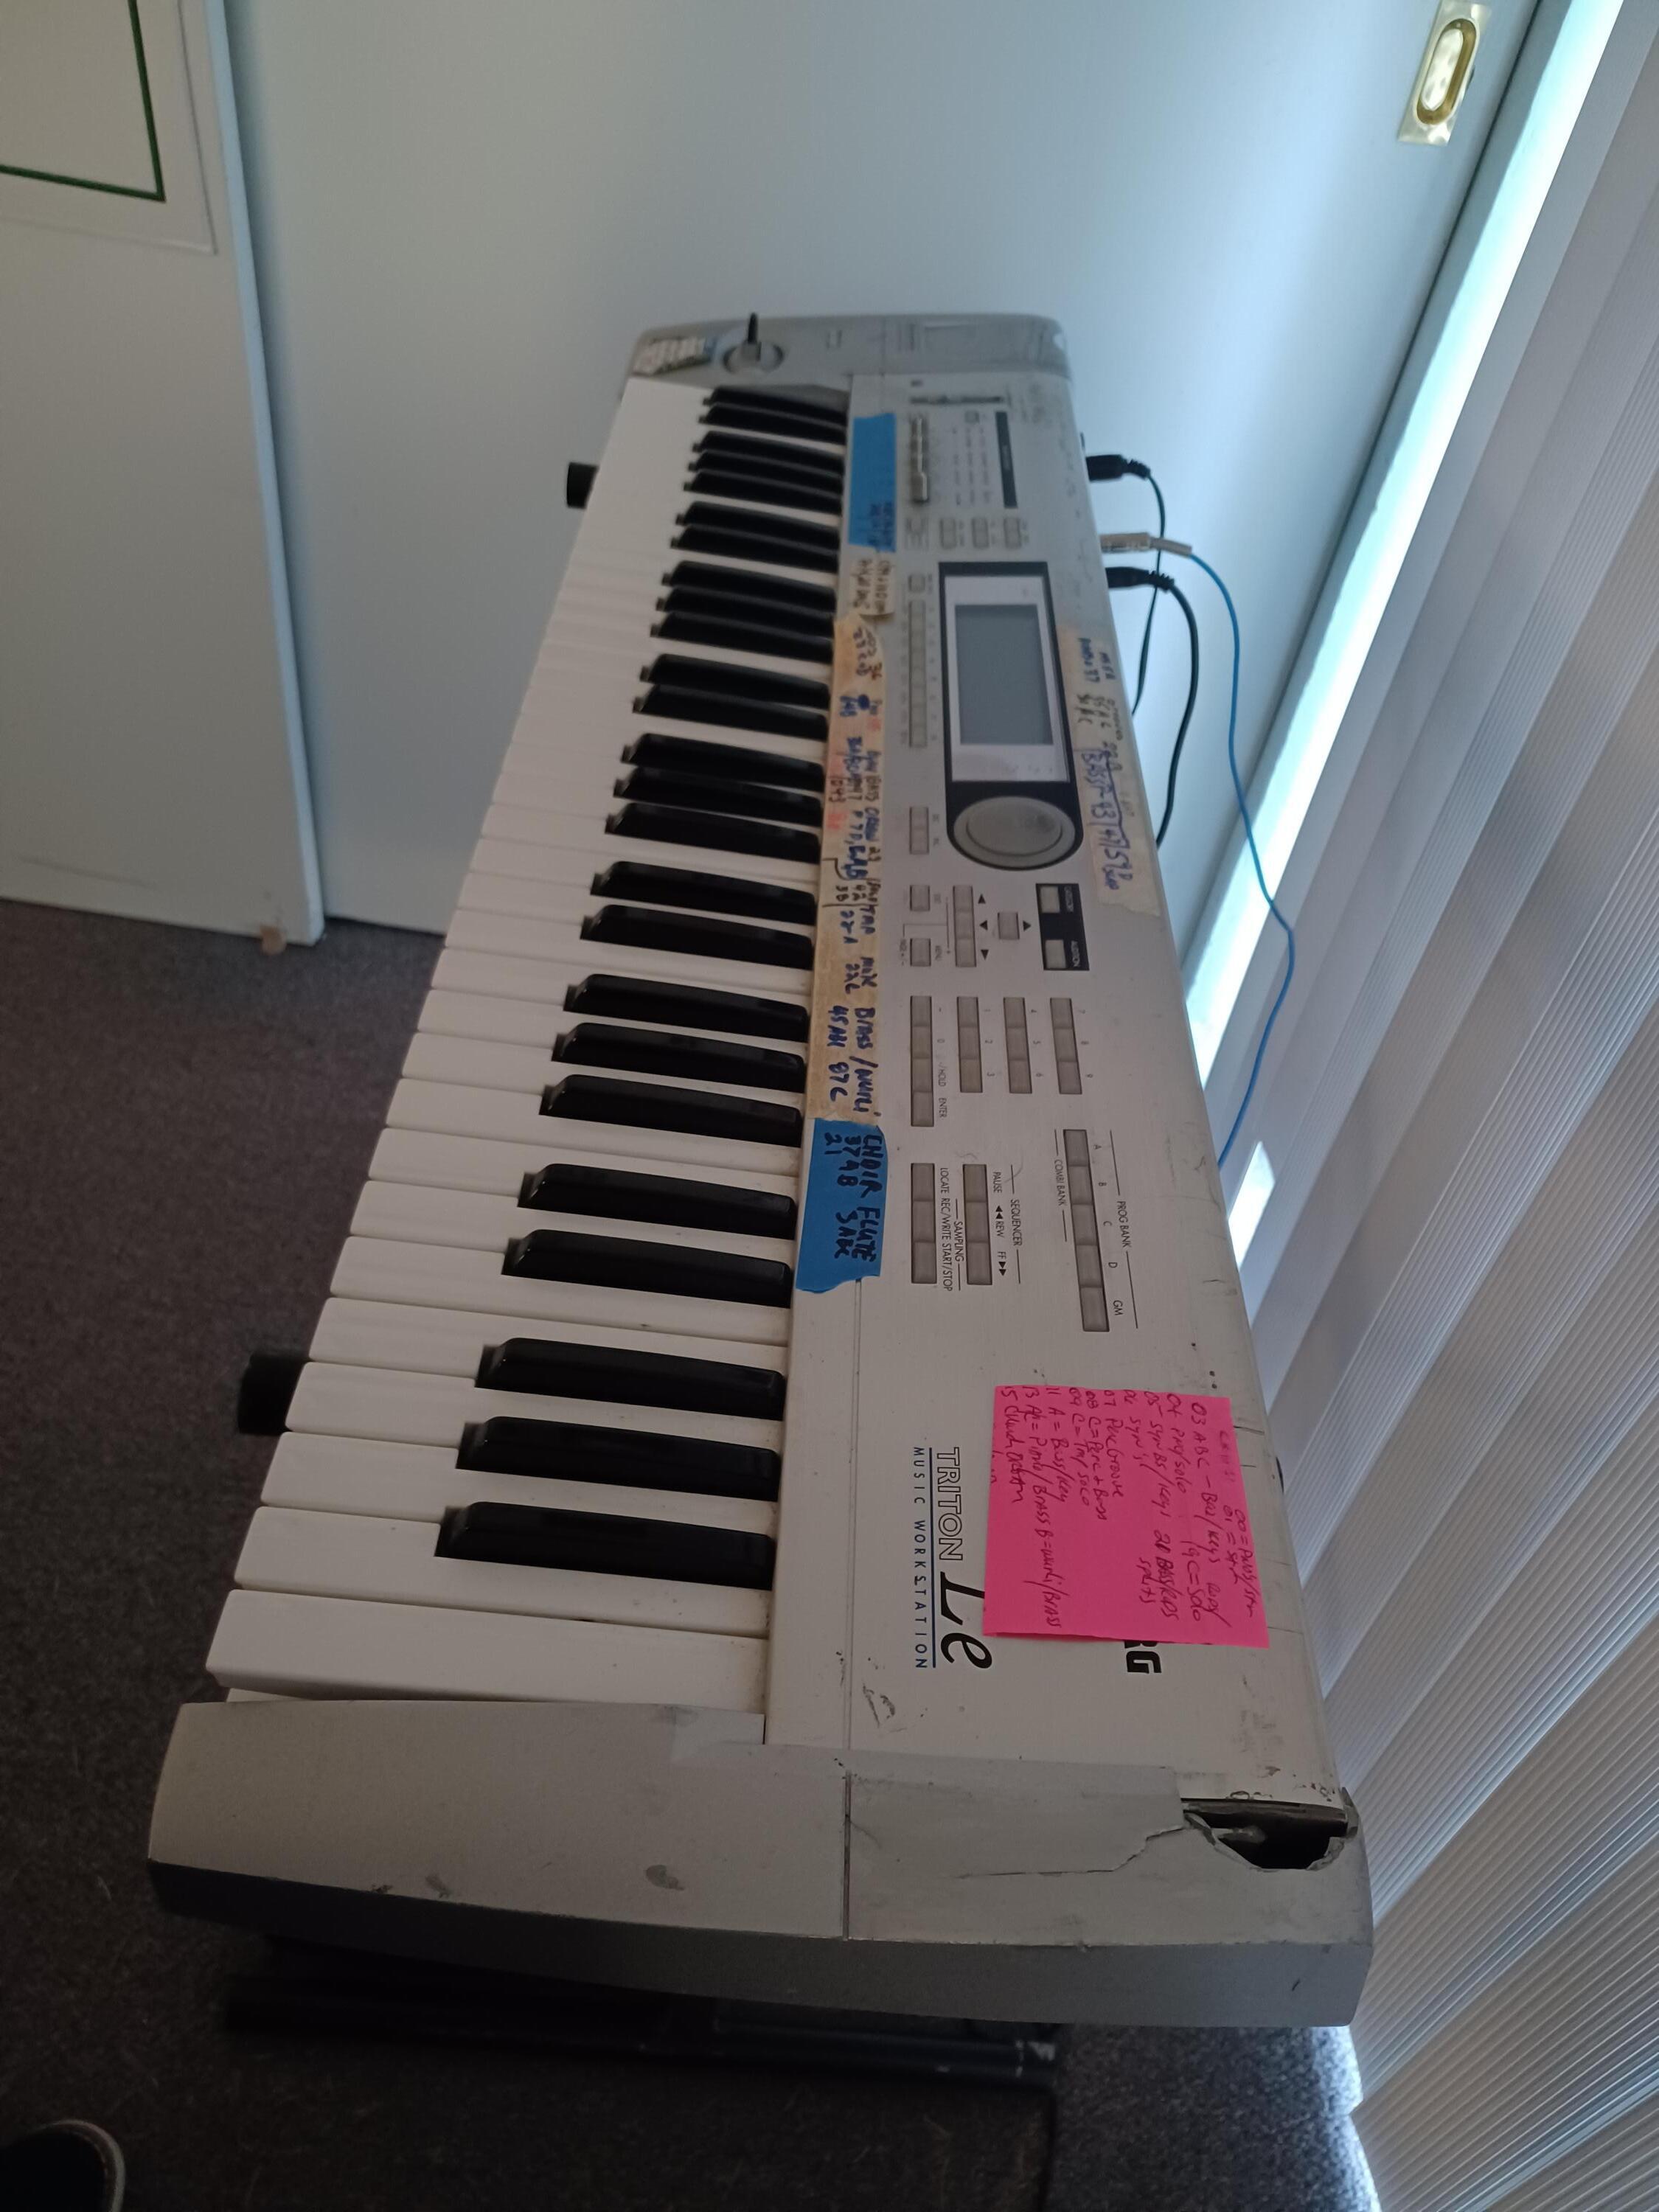 Used Korg Triton le 61 - Sweetwater's Gear Exchange